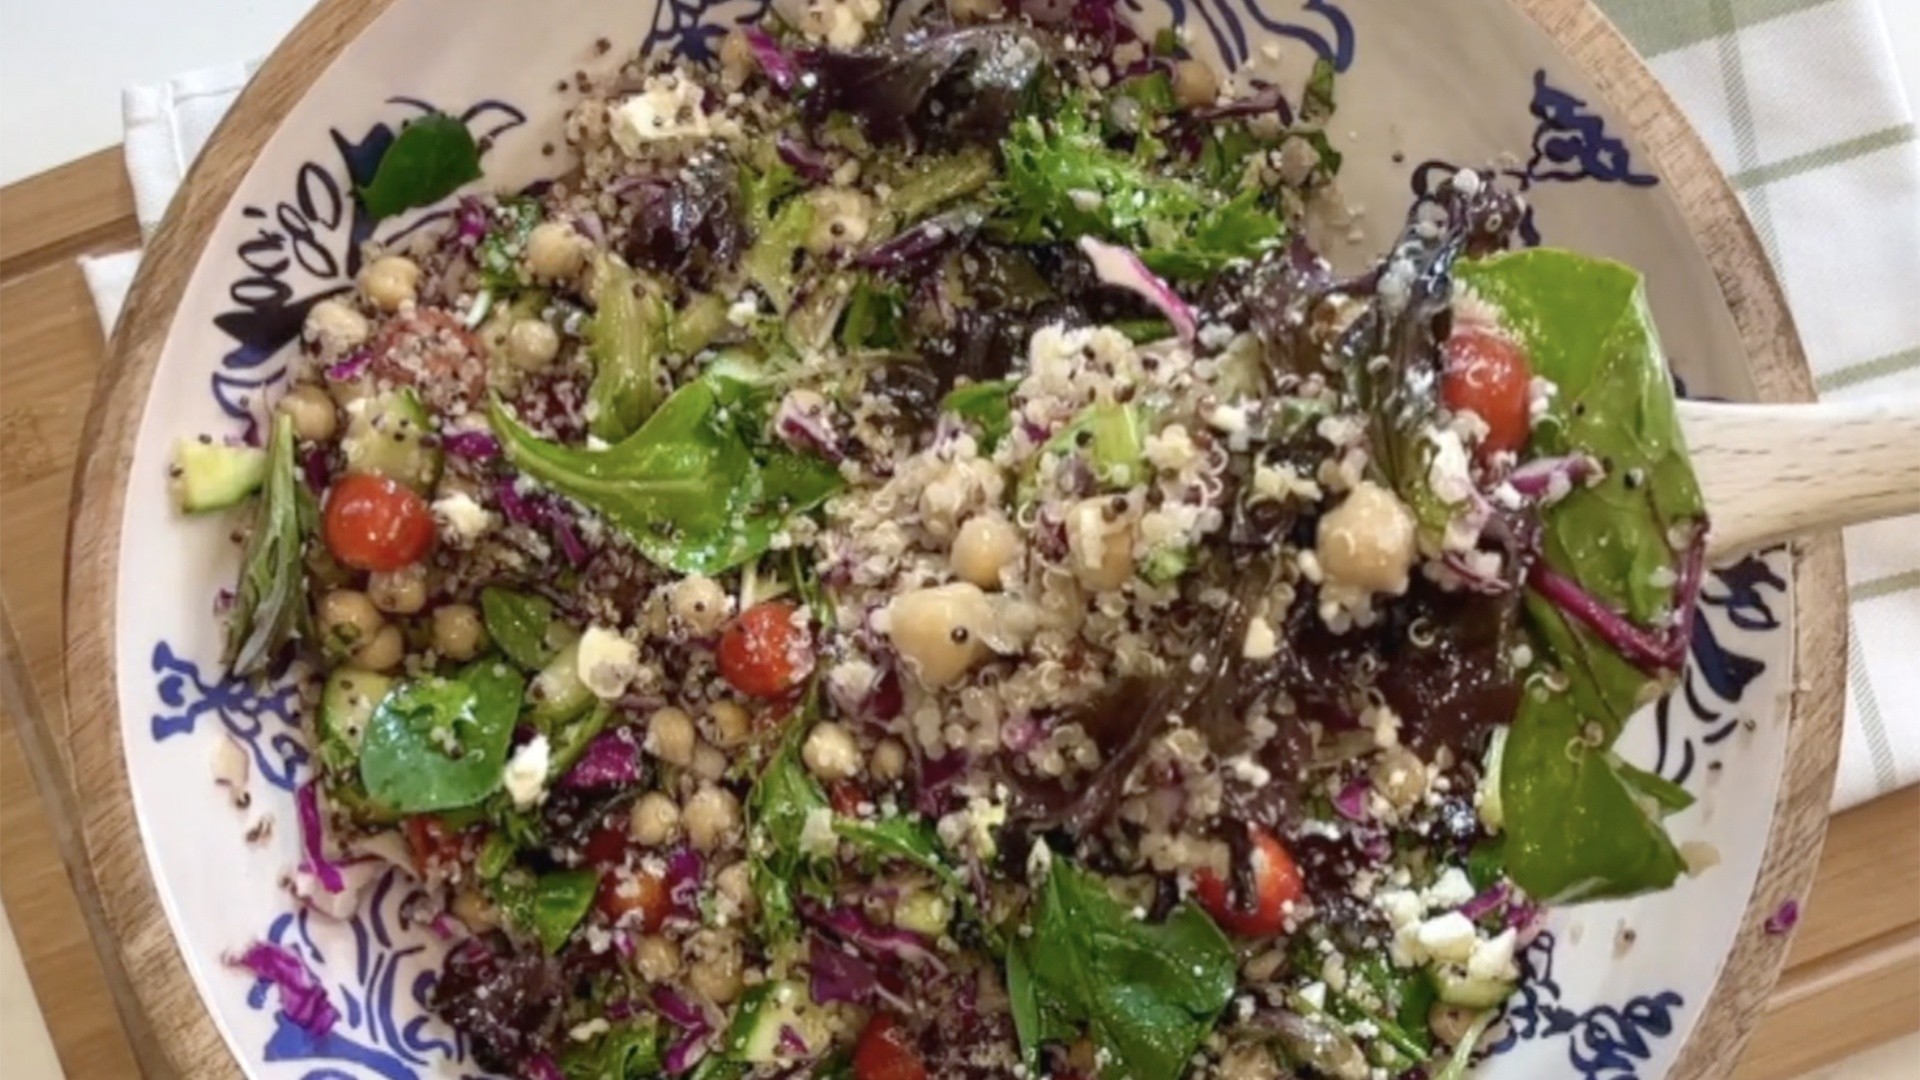 Start your new year strong with a salad packed with superfoods